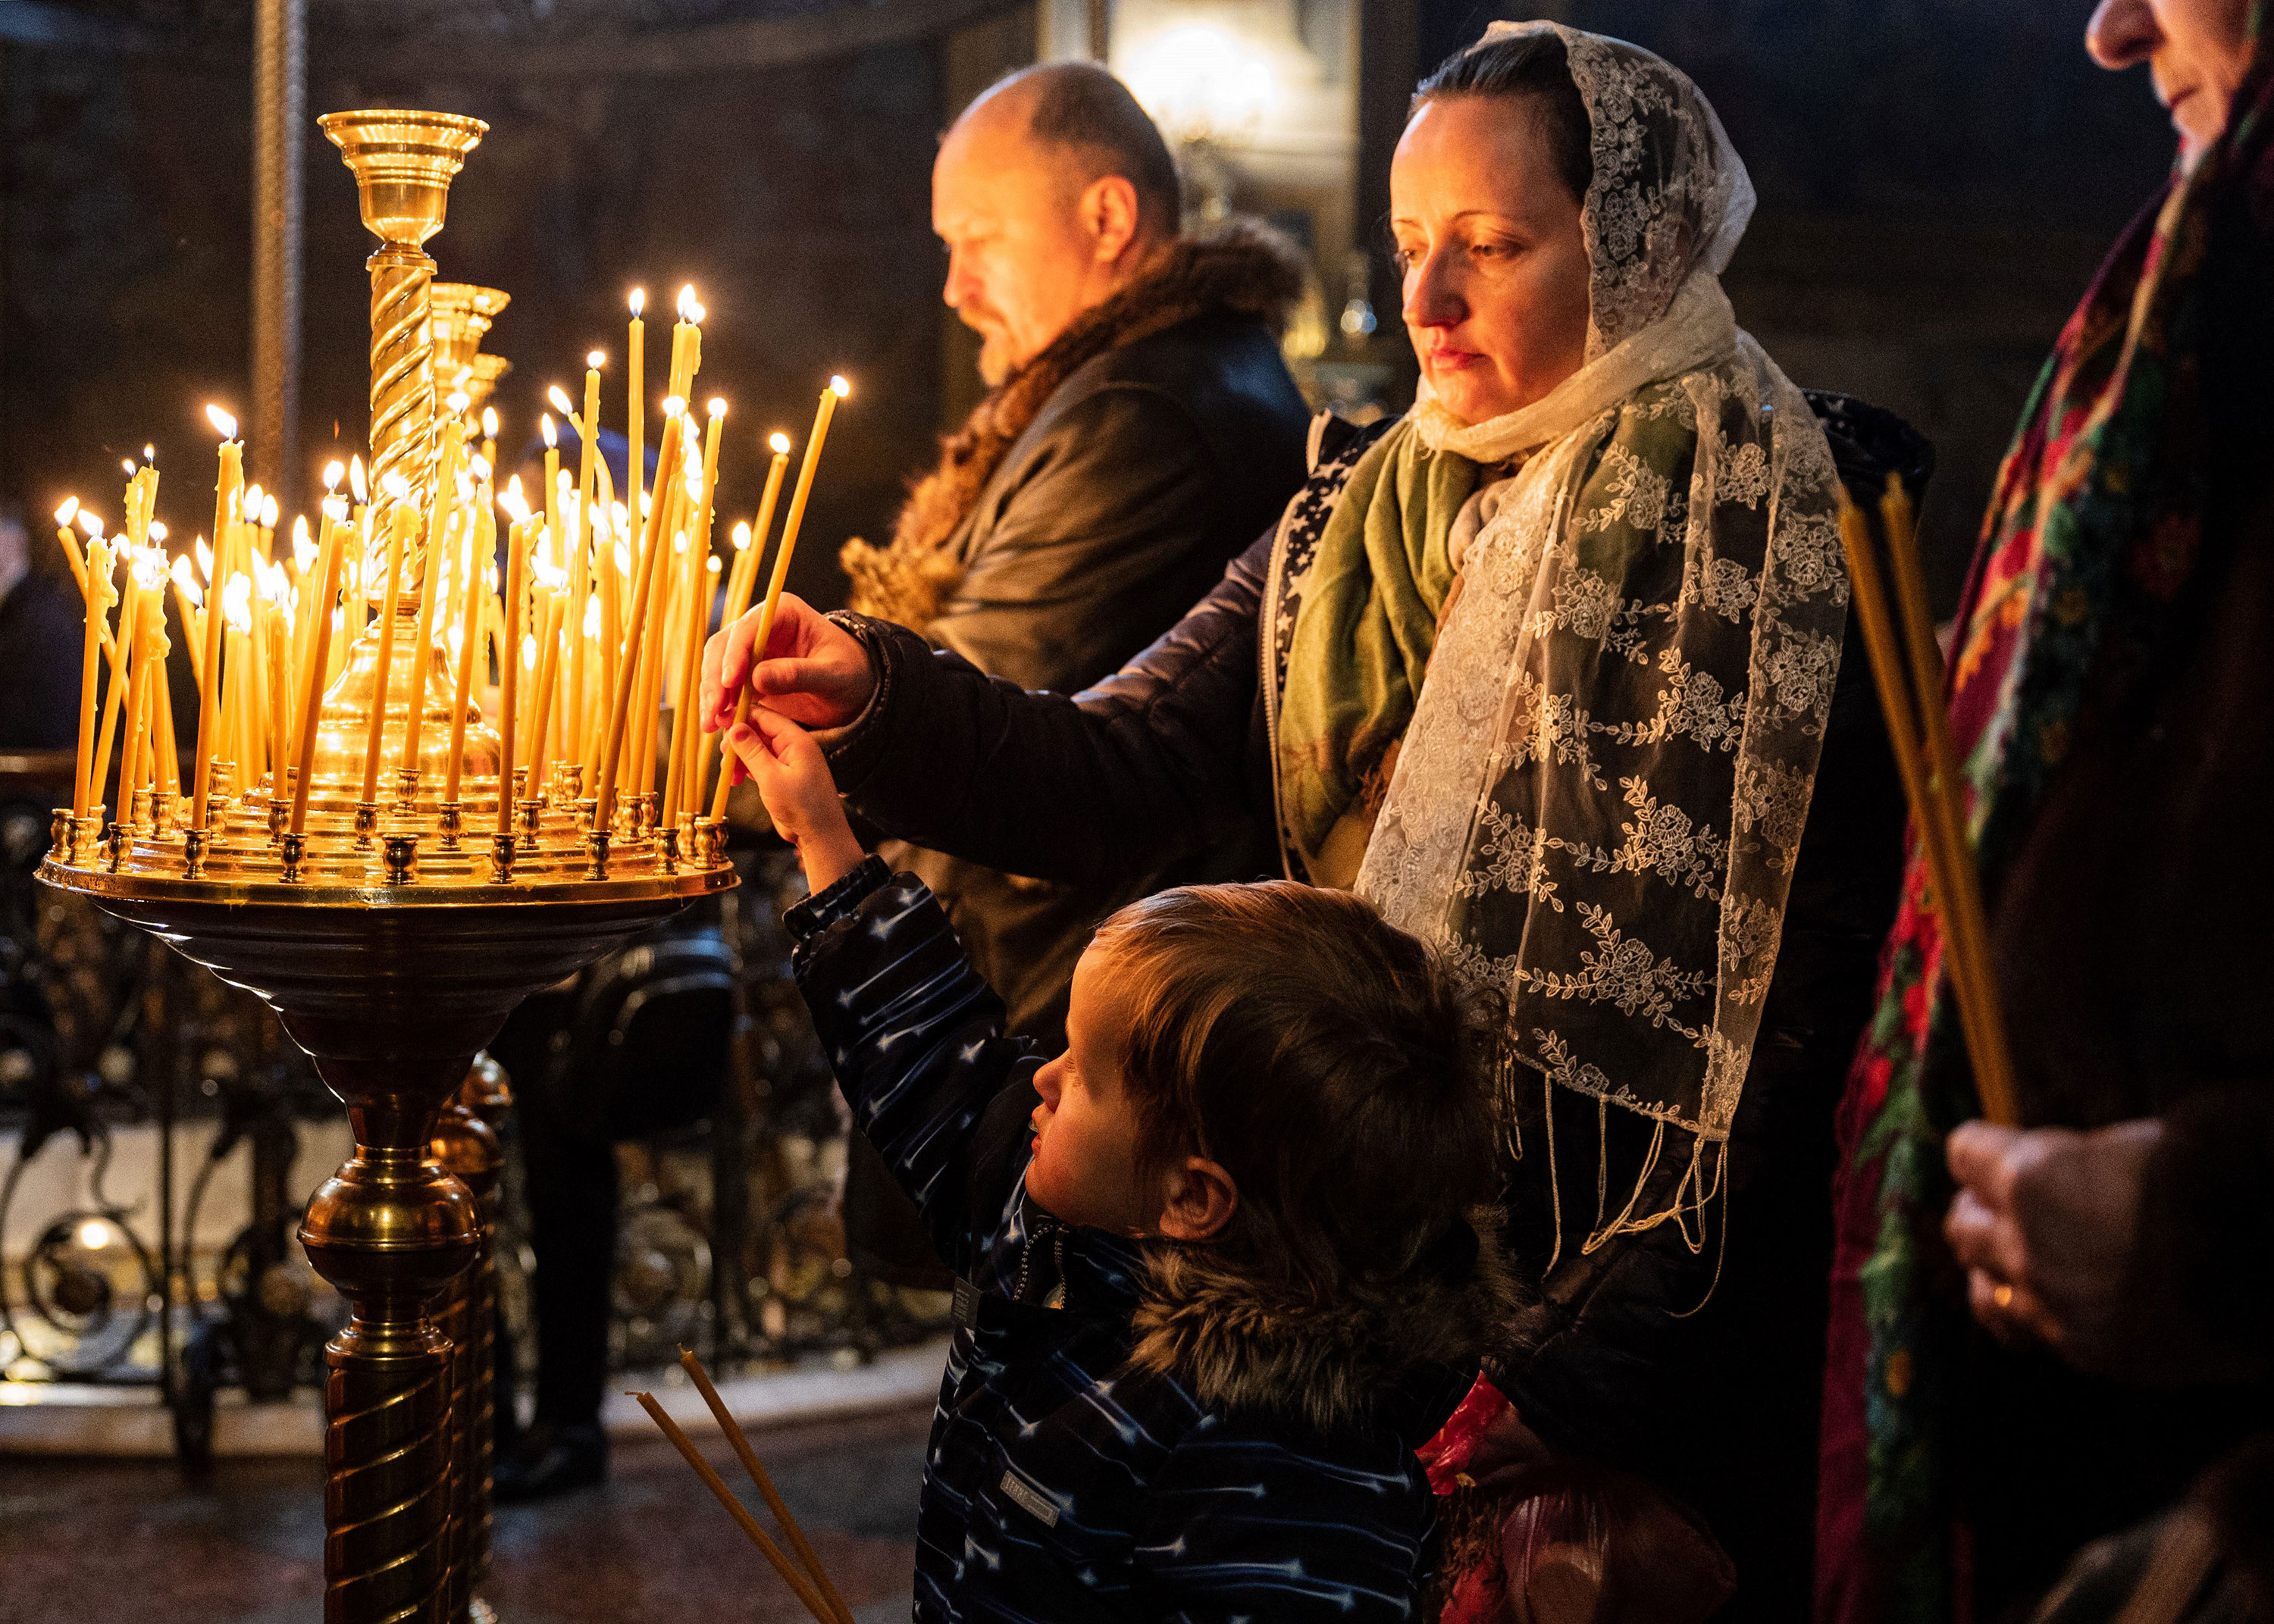 Worshippers light candles during an Orthodox Christmas service at the St. Michael's Golden-Domed Monastery in Kyiv on Saturday. 